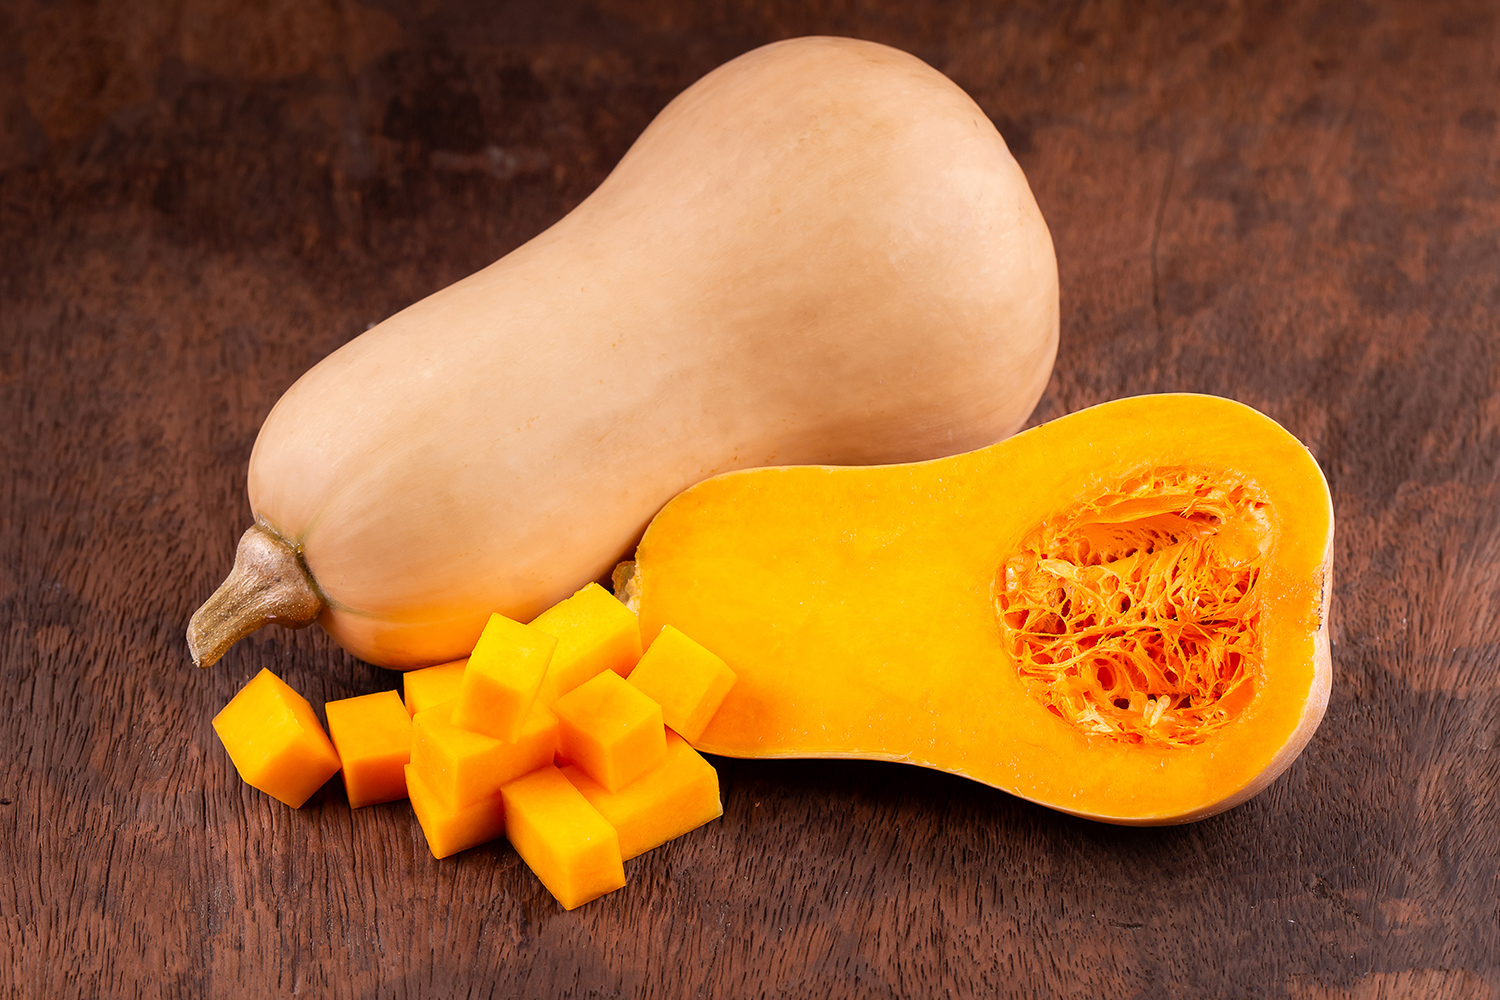 Whole and cut butternut on a wooden table with orange pulp and core